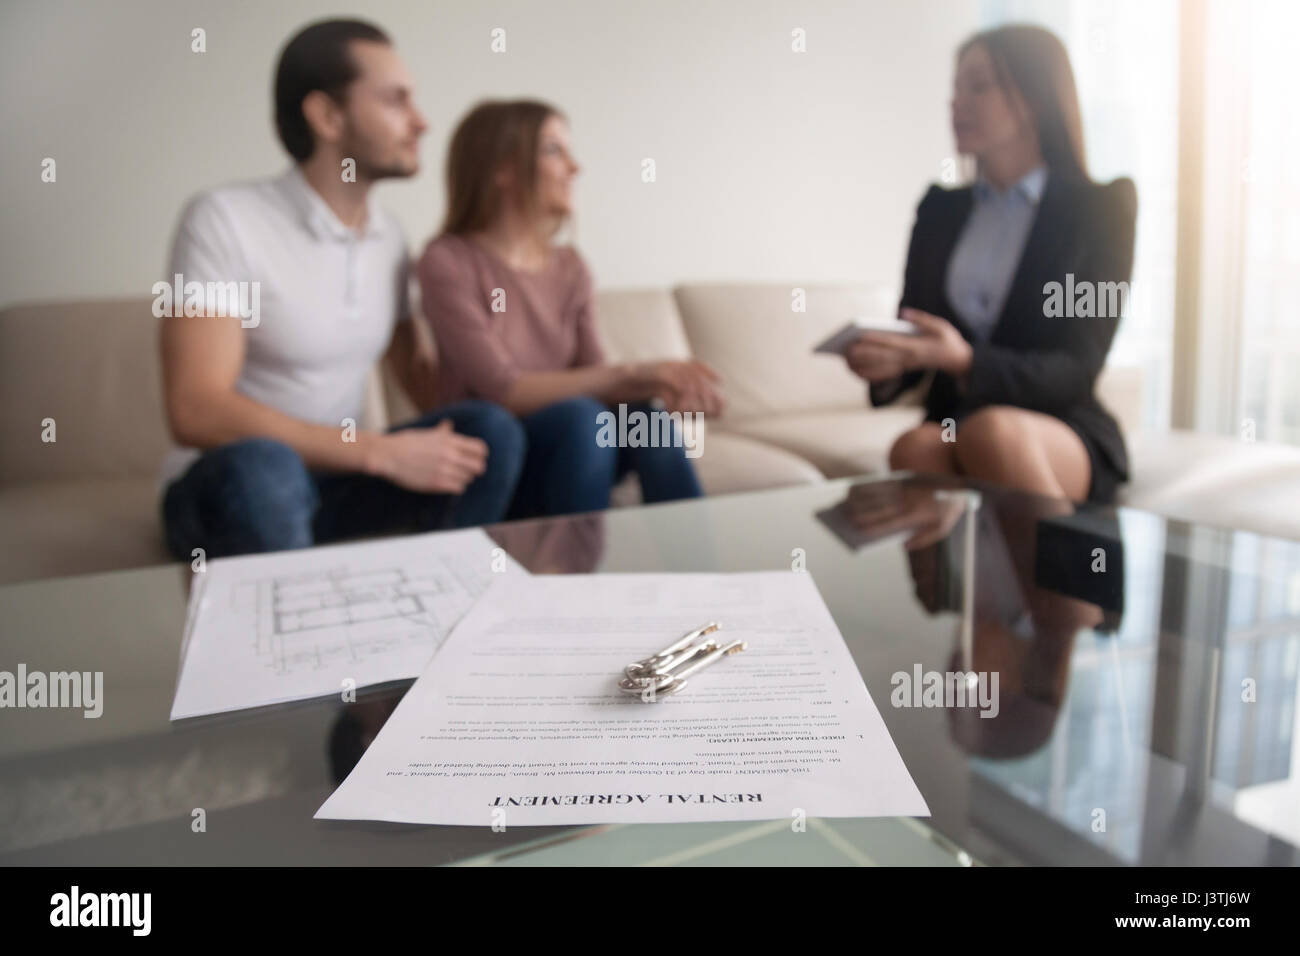 Couple meeting with realtor, focus on rental agreement and keys Stock Photo